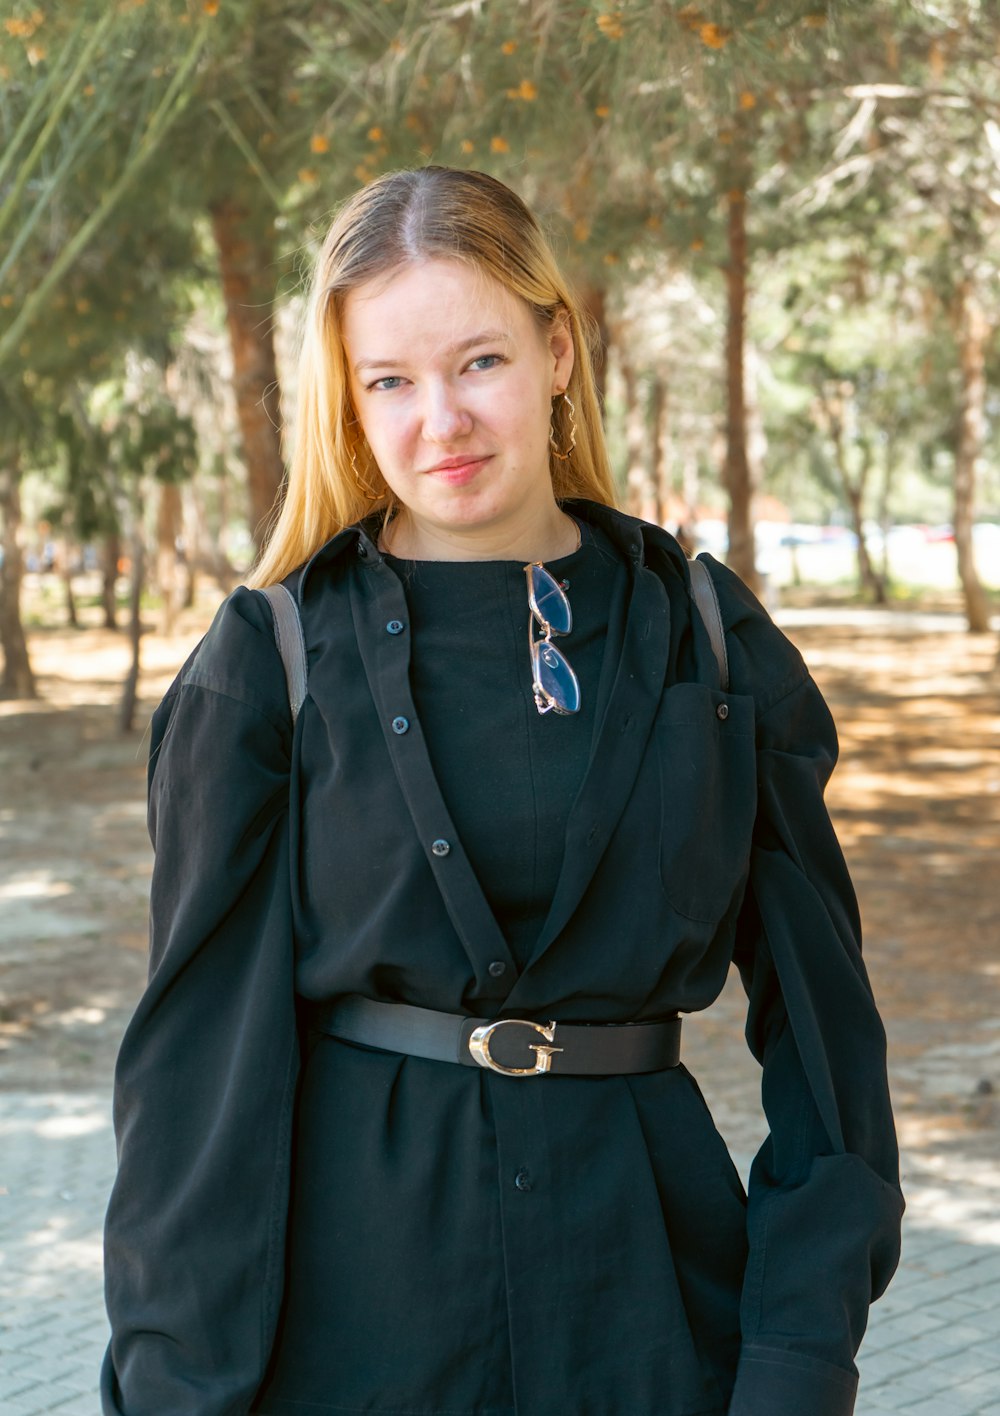 a woman in a black dress and jacket posing for a picture